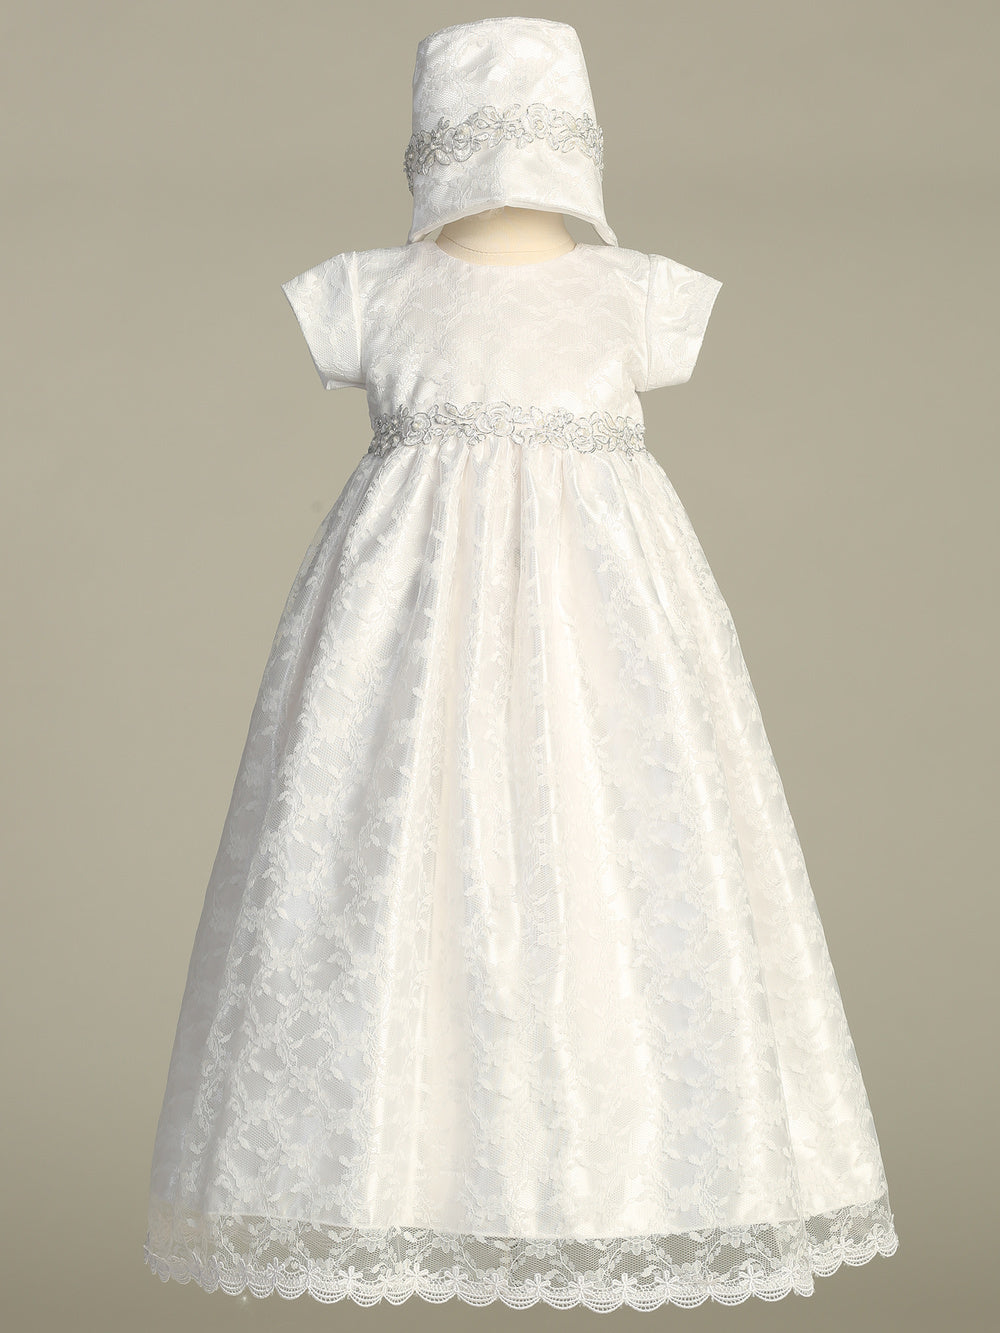 Christening Gown with Silver Embroidered Trim